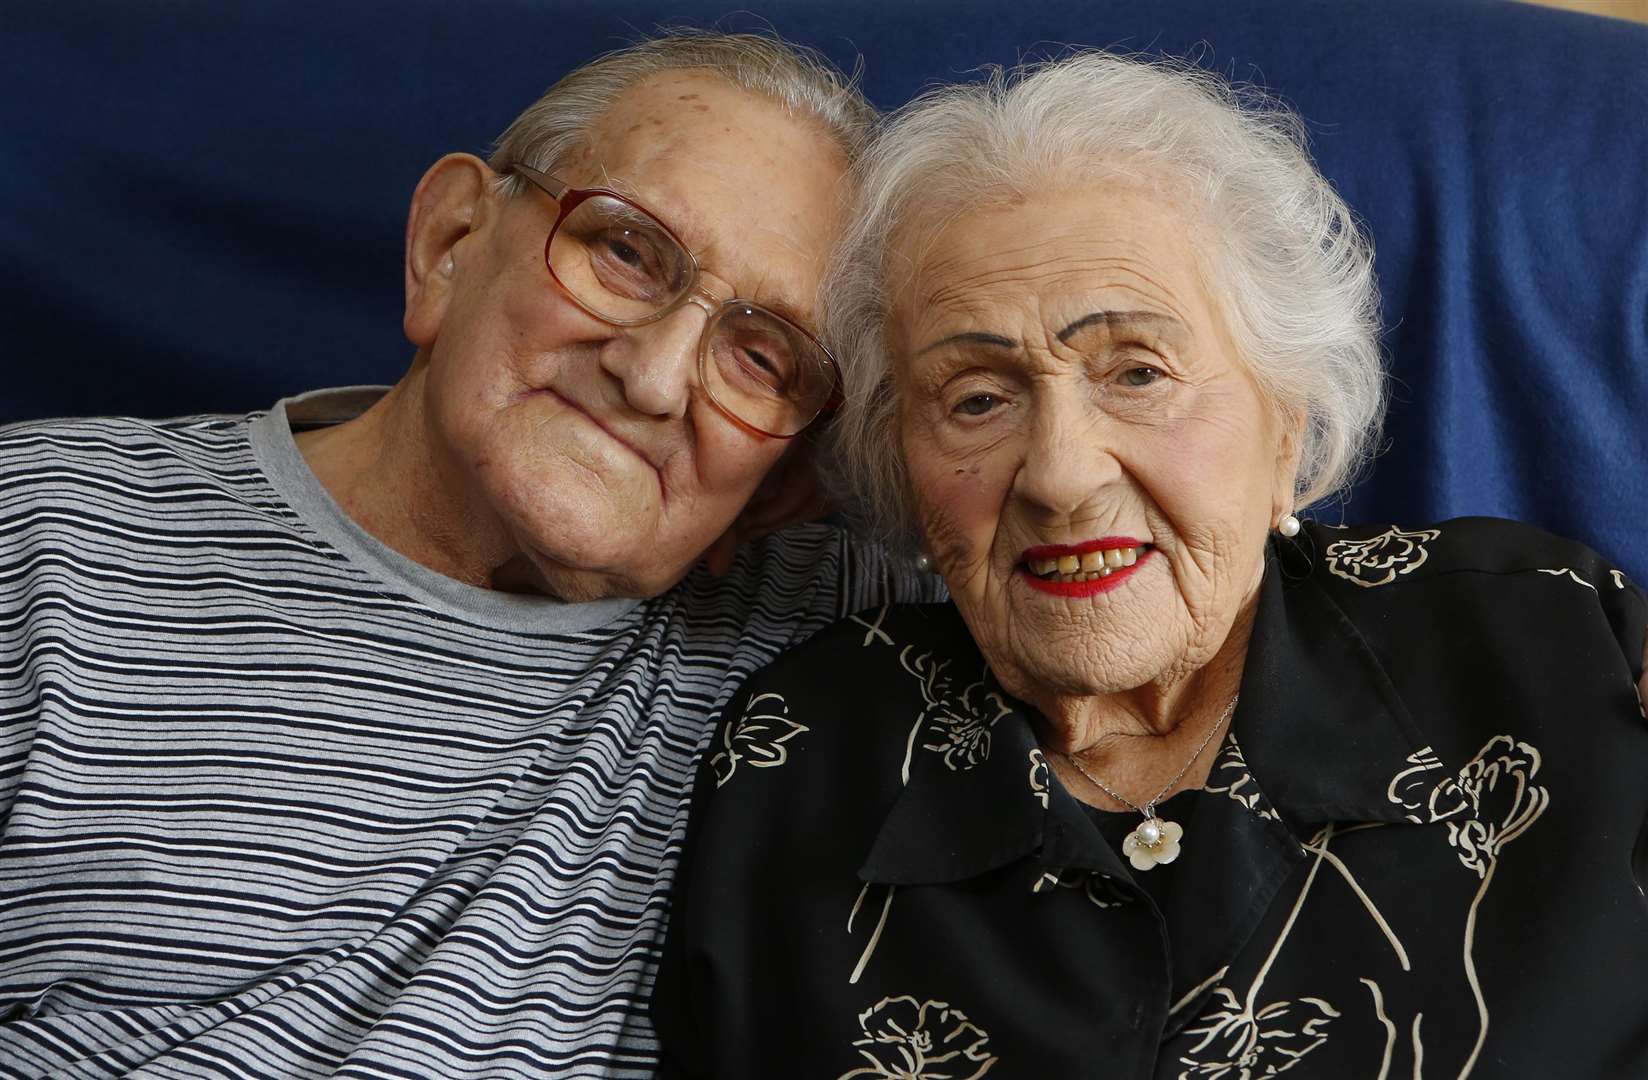 James and Vera Brown, 94 and 95, are celebrating their 70th wedding anniversary